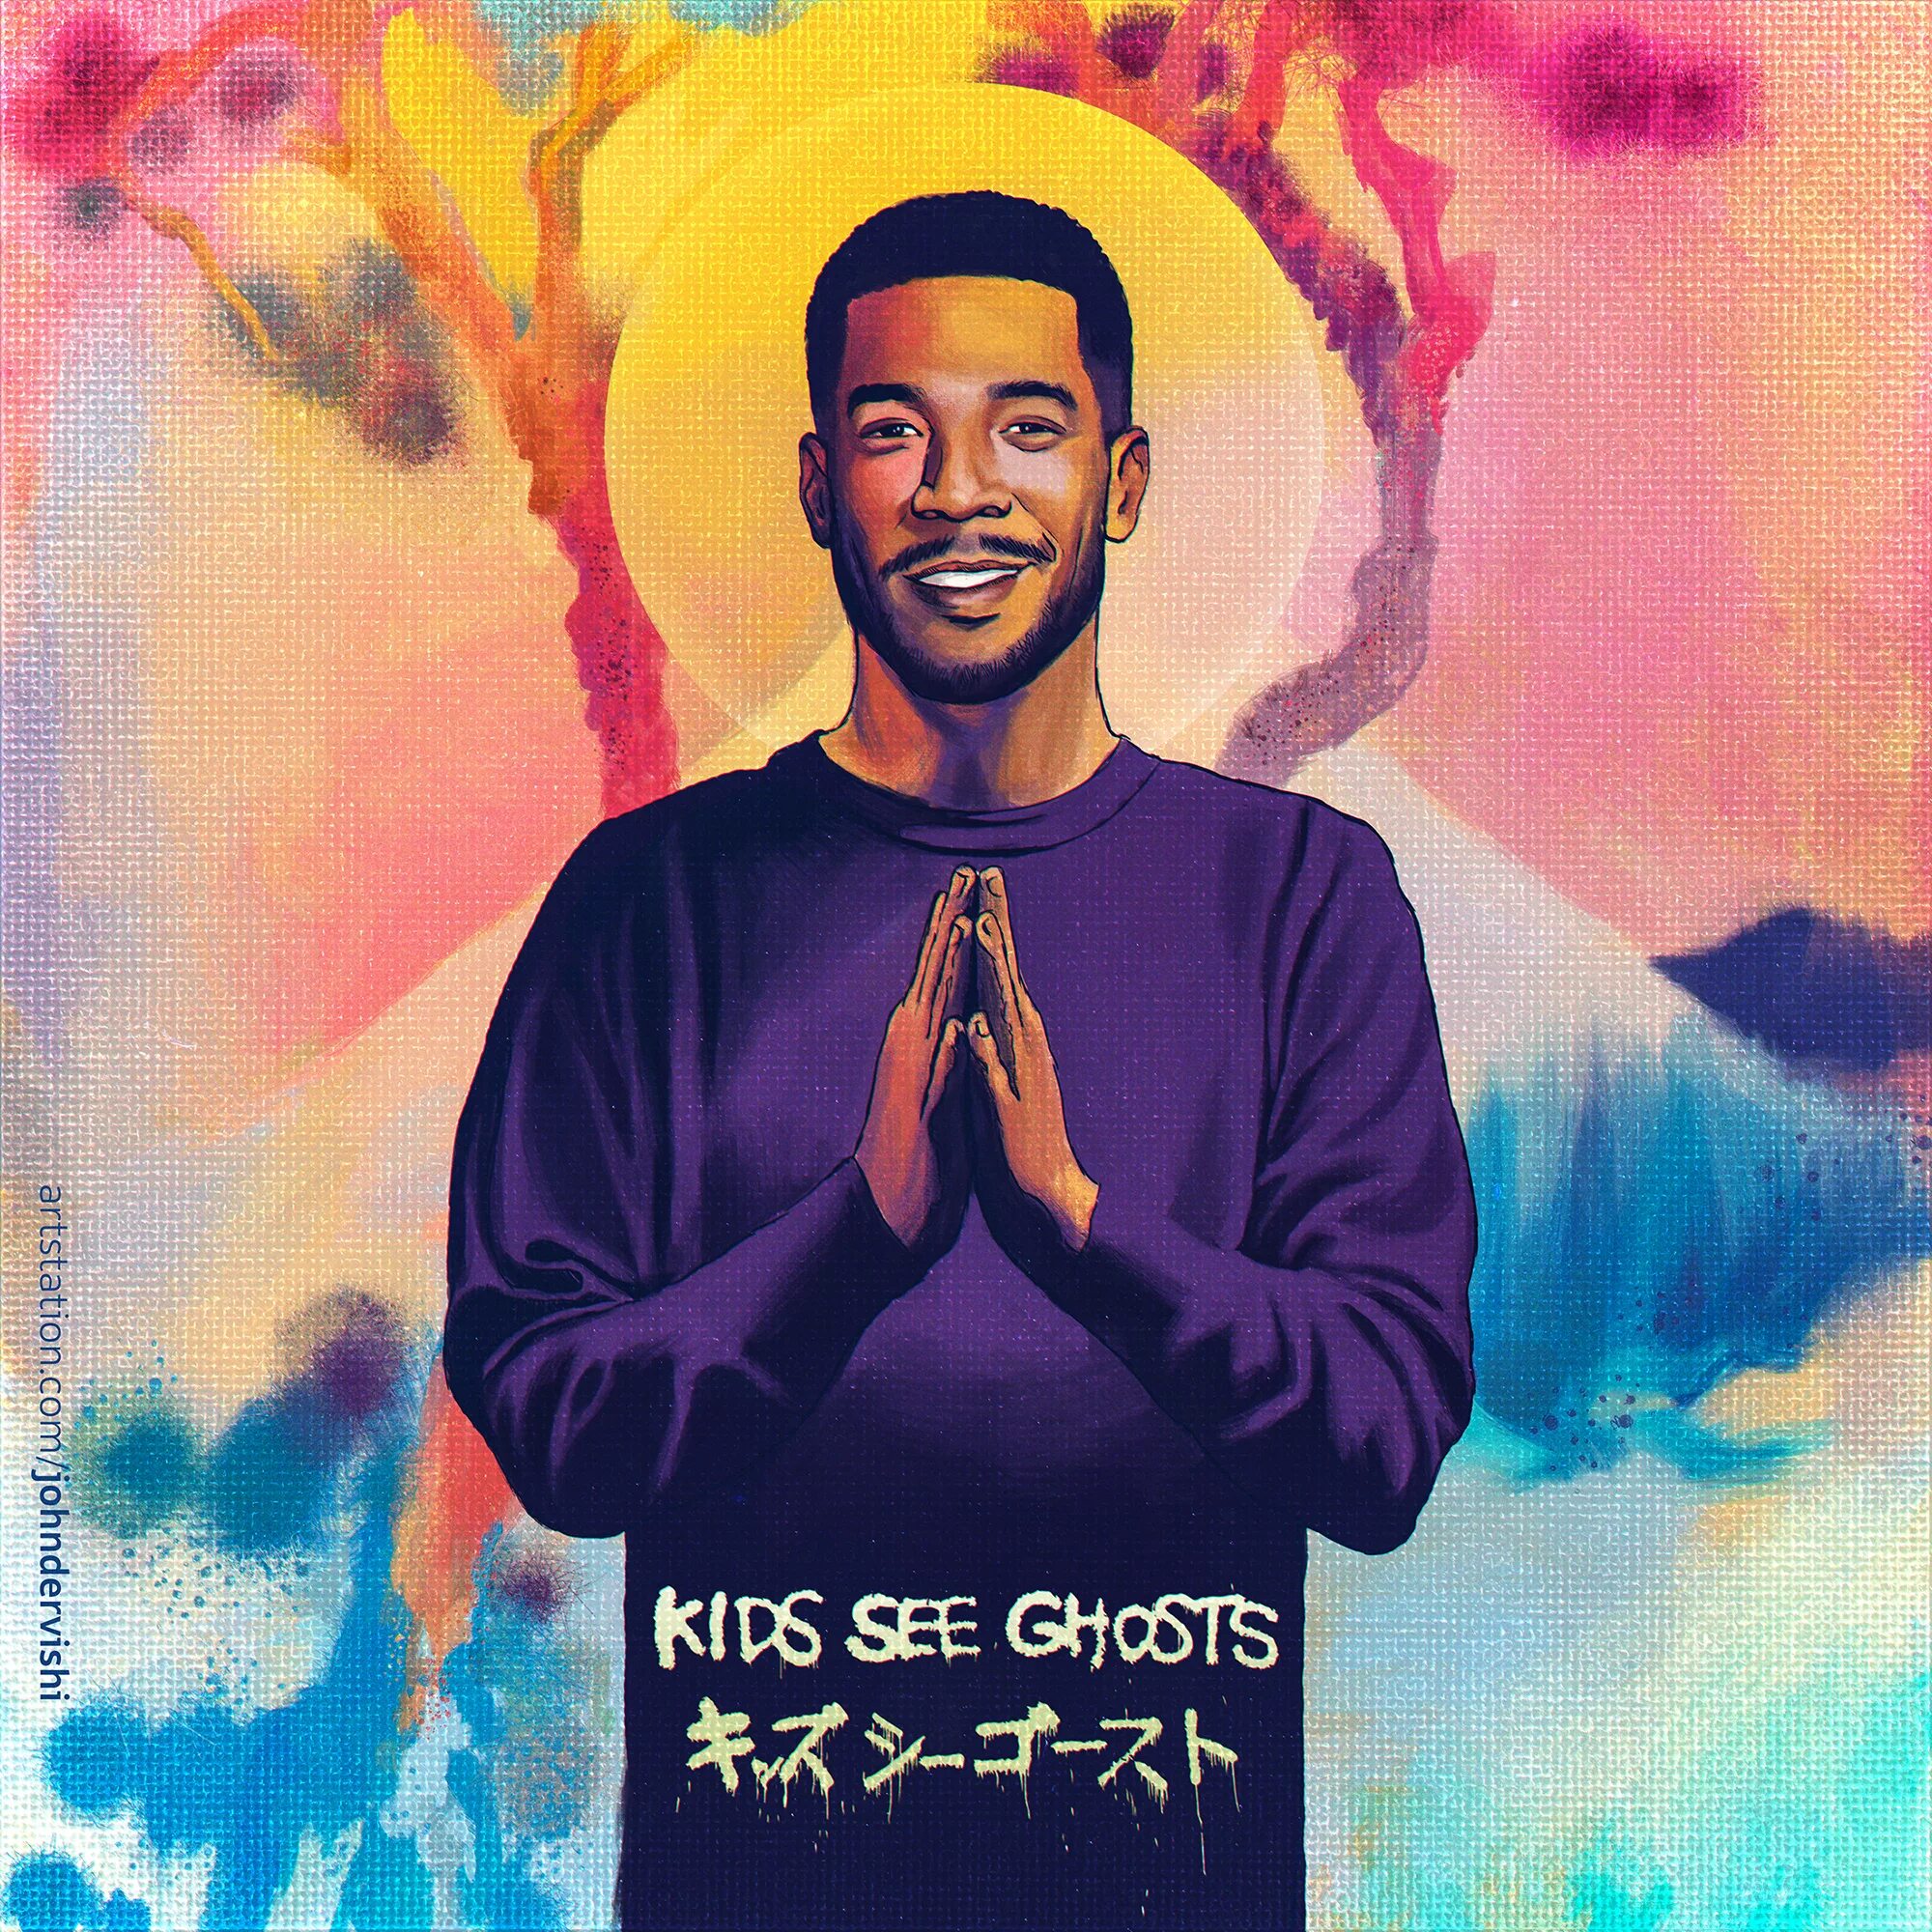 Kid Cudi. Kid Cudi Art. Kid Cudi album. Kid Cudi арты. Kanye west rich the kid